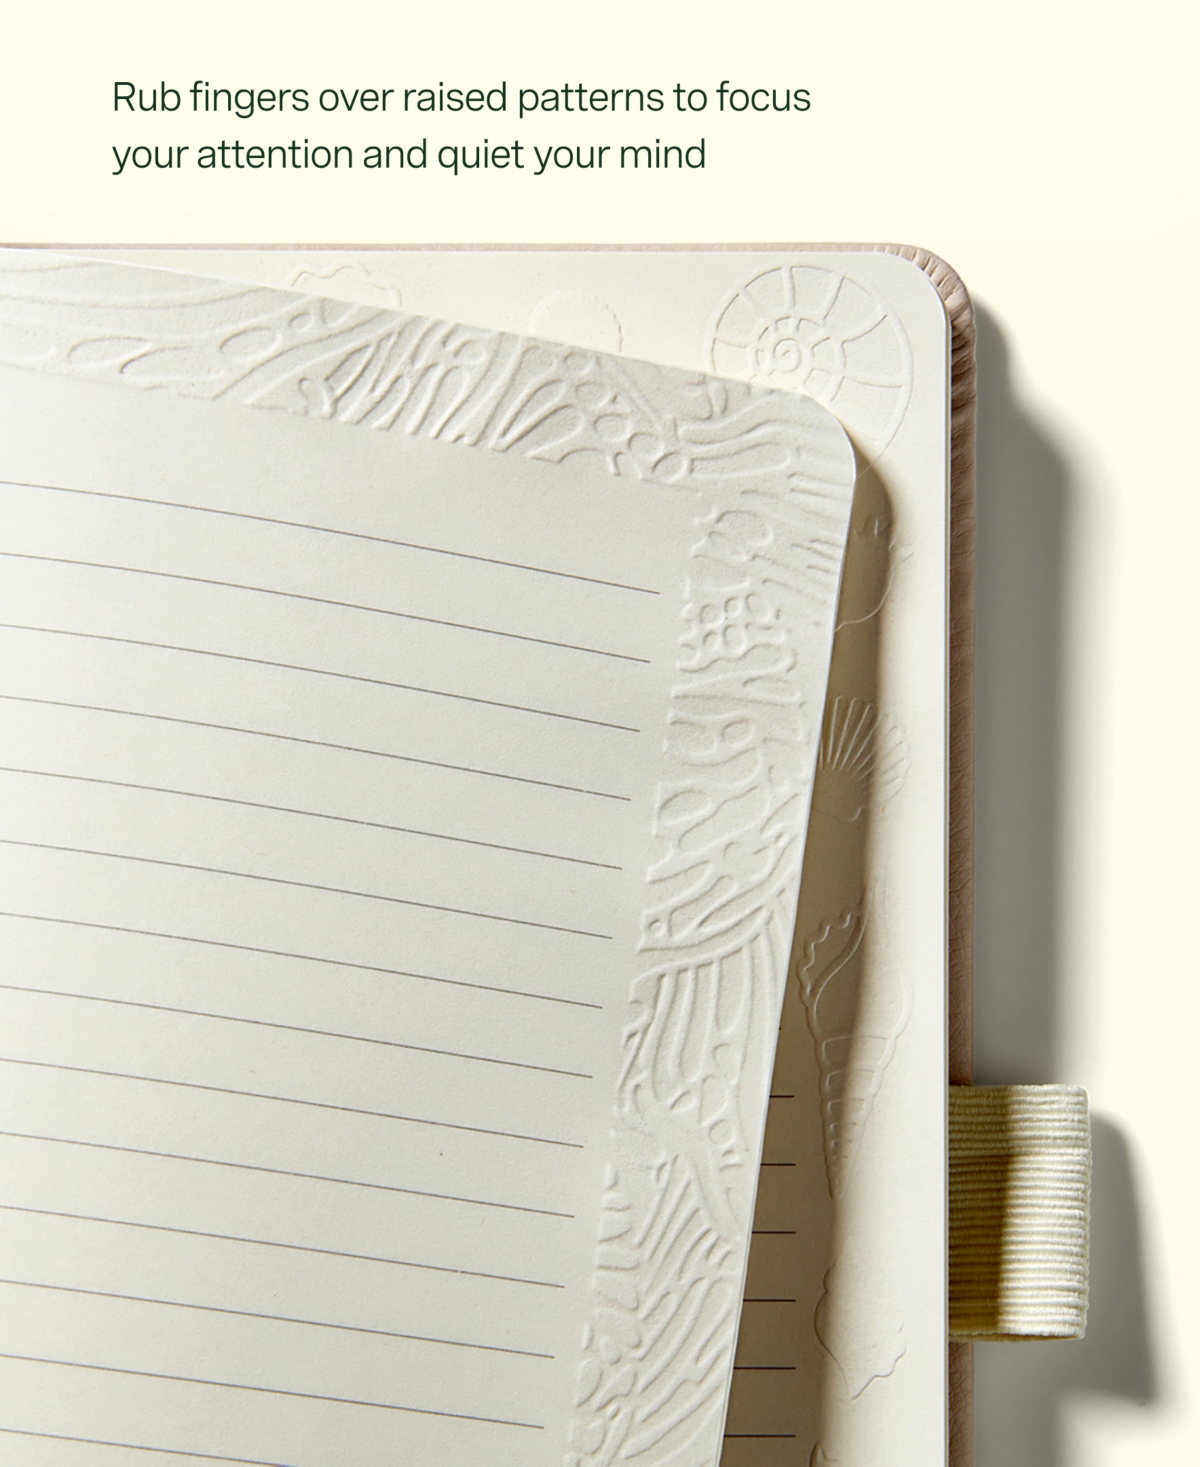 Shop Lifelines "shake It Up" Sensory Journal With Tactile Cover Embossed Paper In Multi Colored